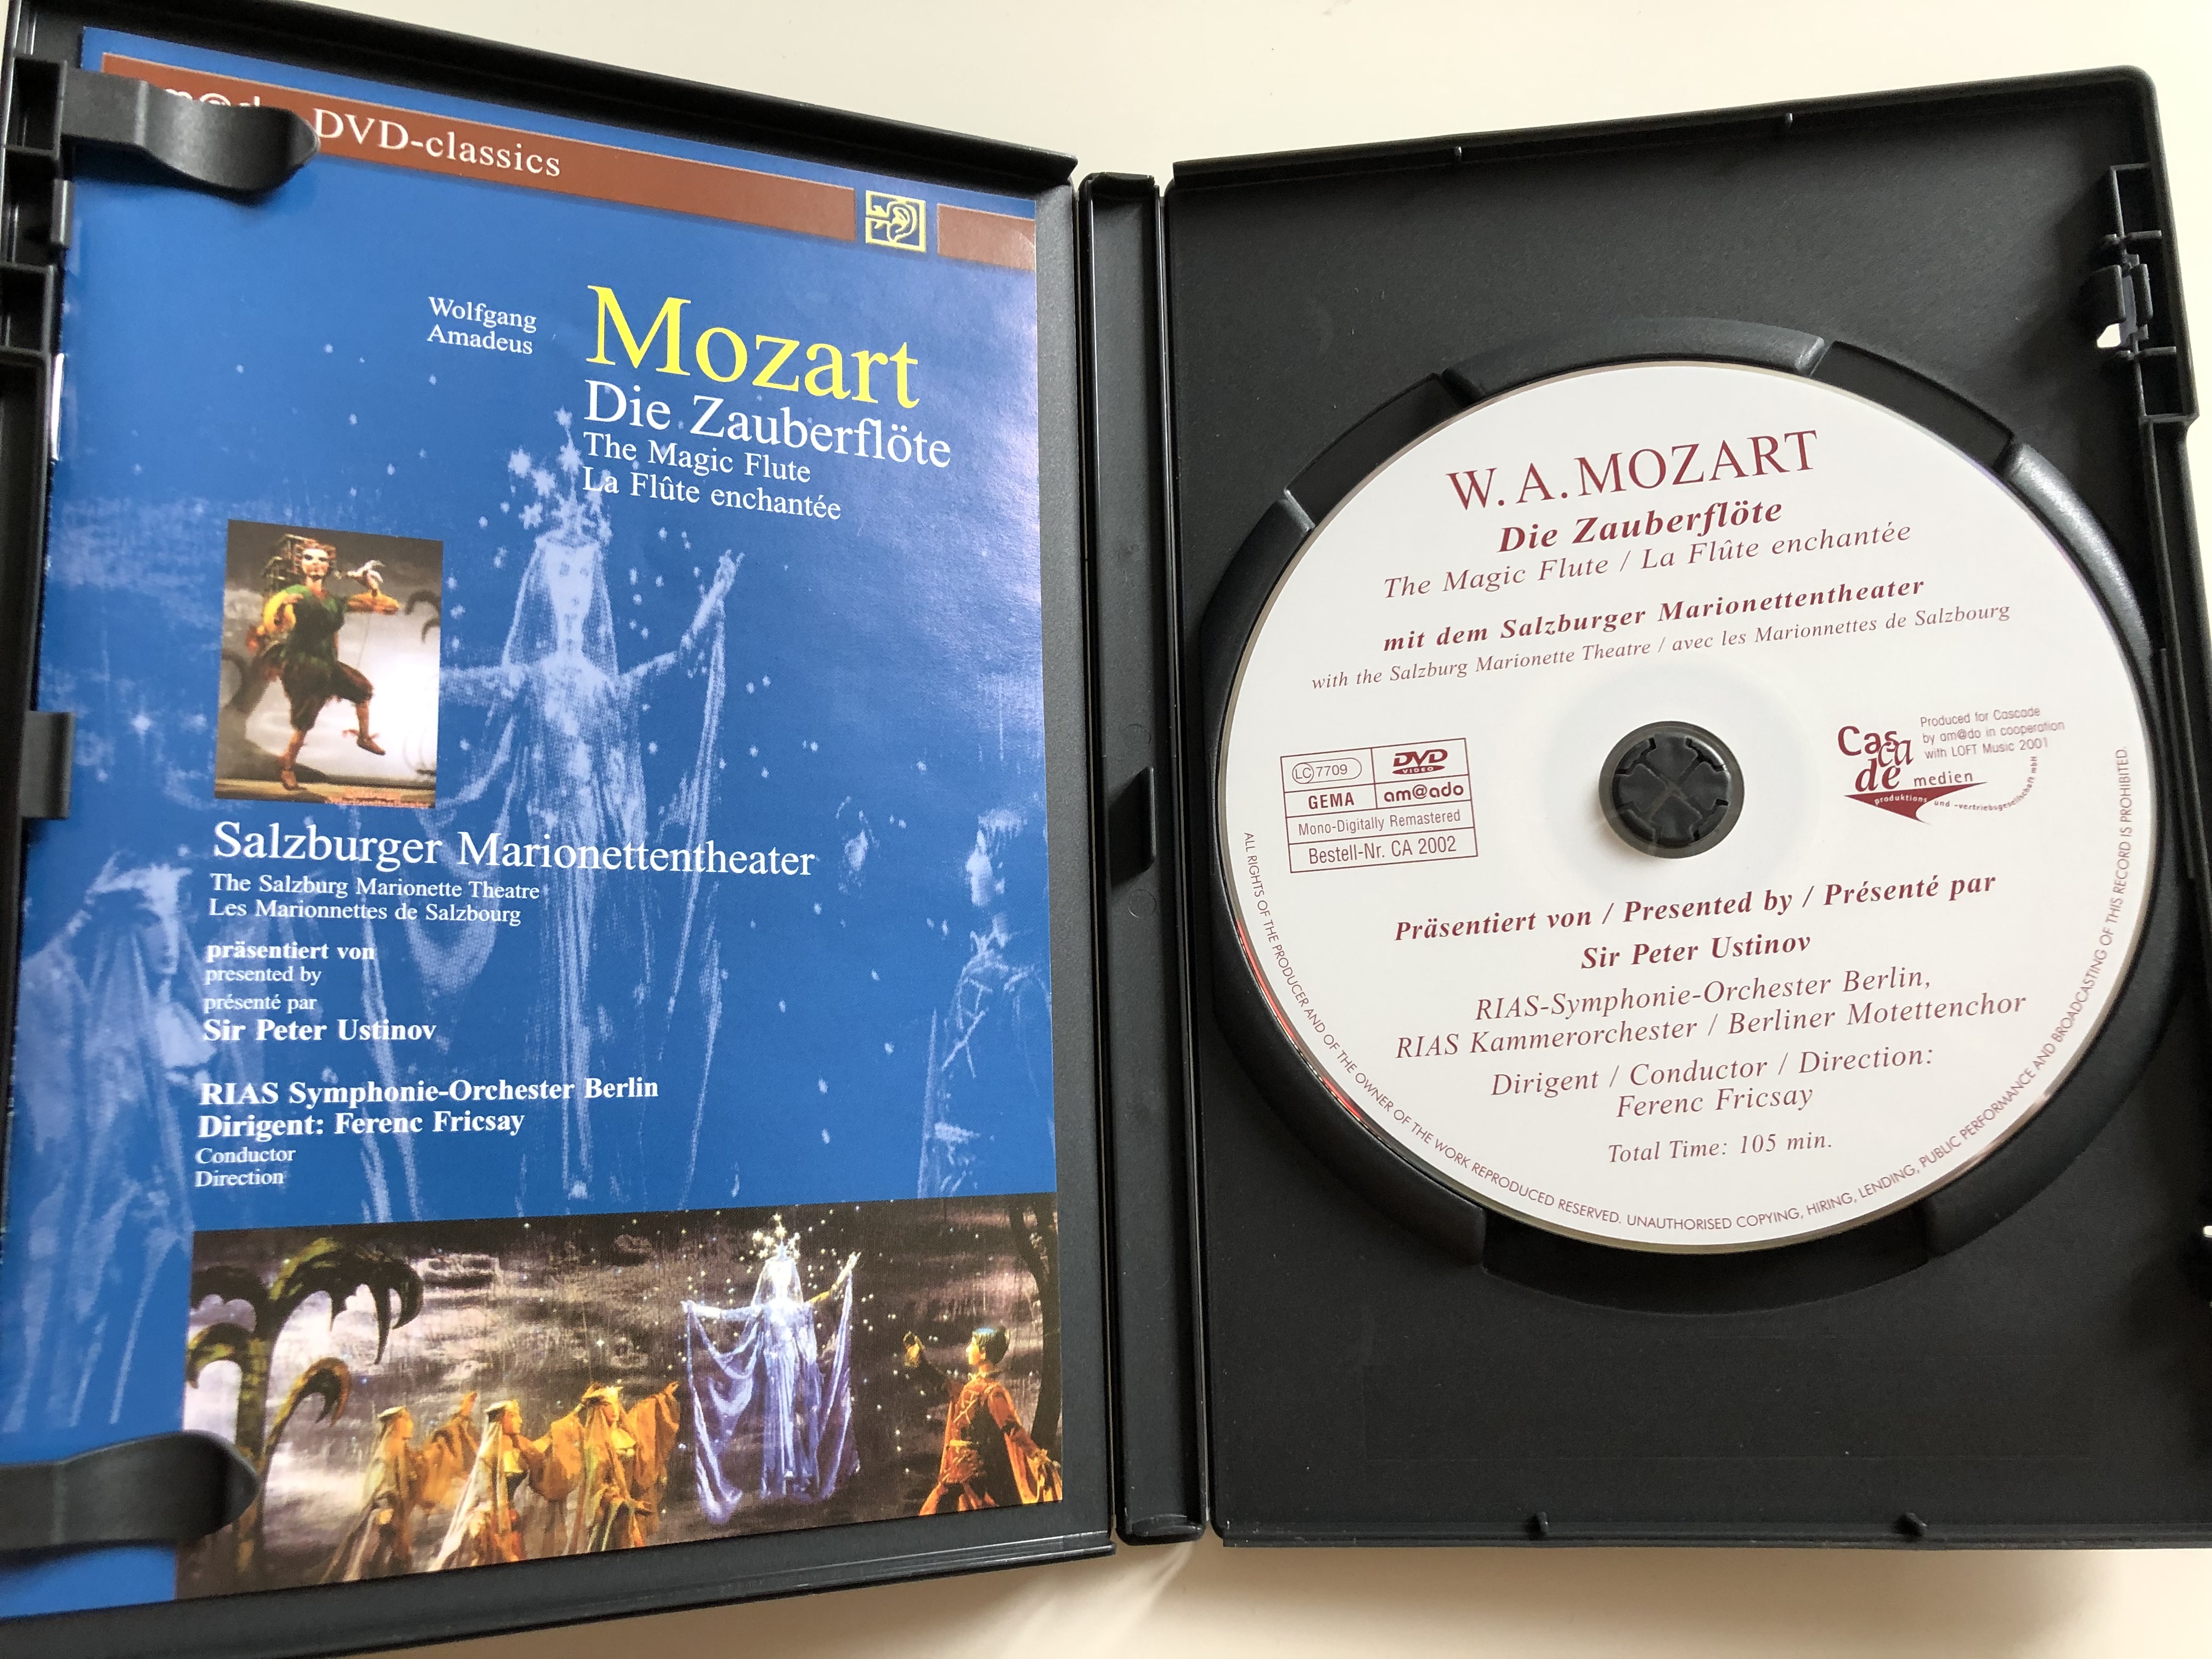 w.a.-mozart-die-zauberfl-te-dvd-2001-the-magic-flute-directed-by-georg-w-bbolt-text-and-narration-by-sir-peter-ustinov-the-salzburg-marionette-theatre-rias-berlin-symphony-orchestra-conducted-by-ferenc-fricsay-2-.jpg